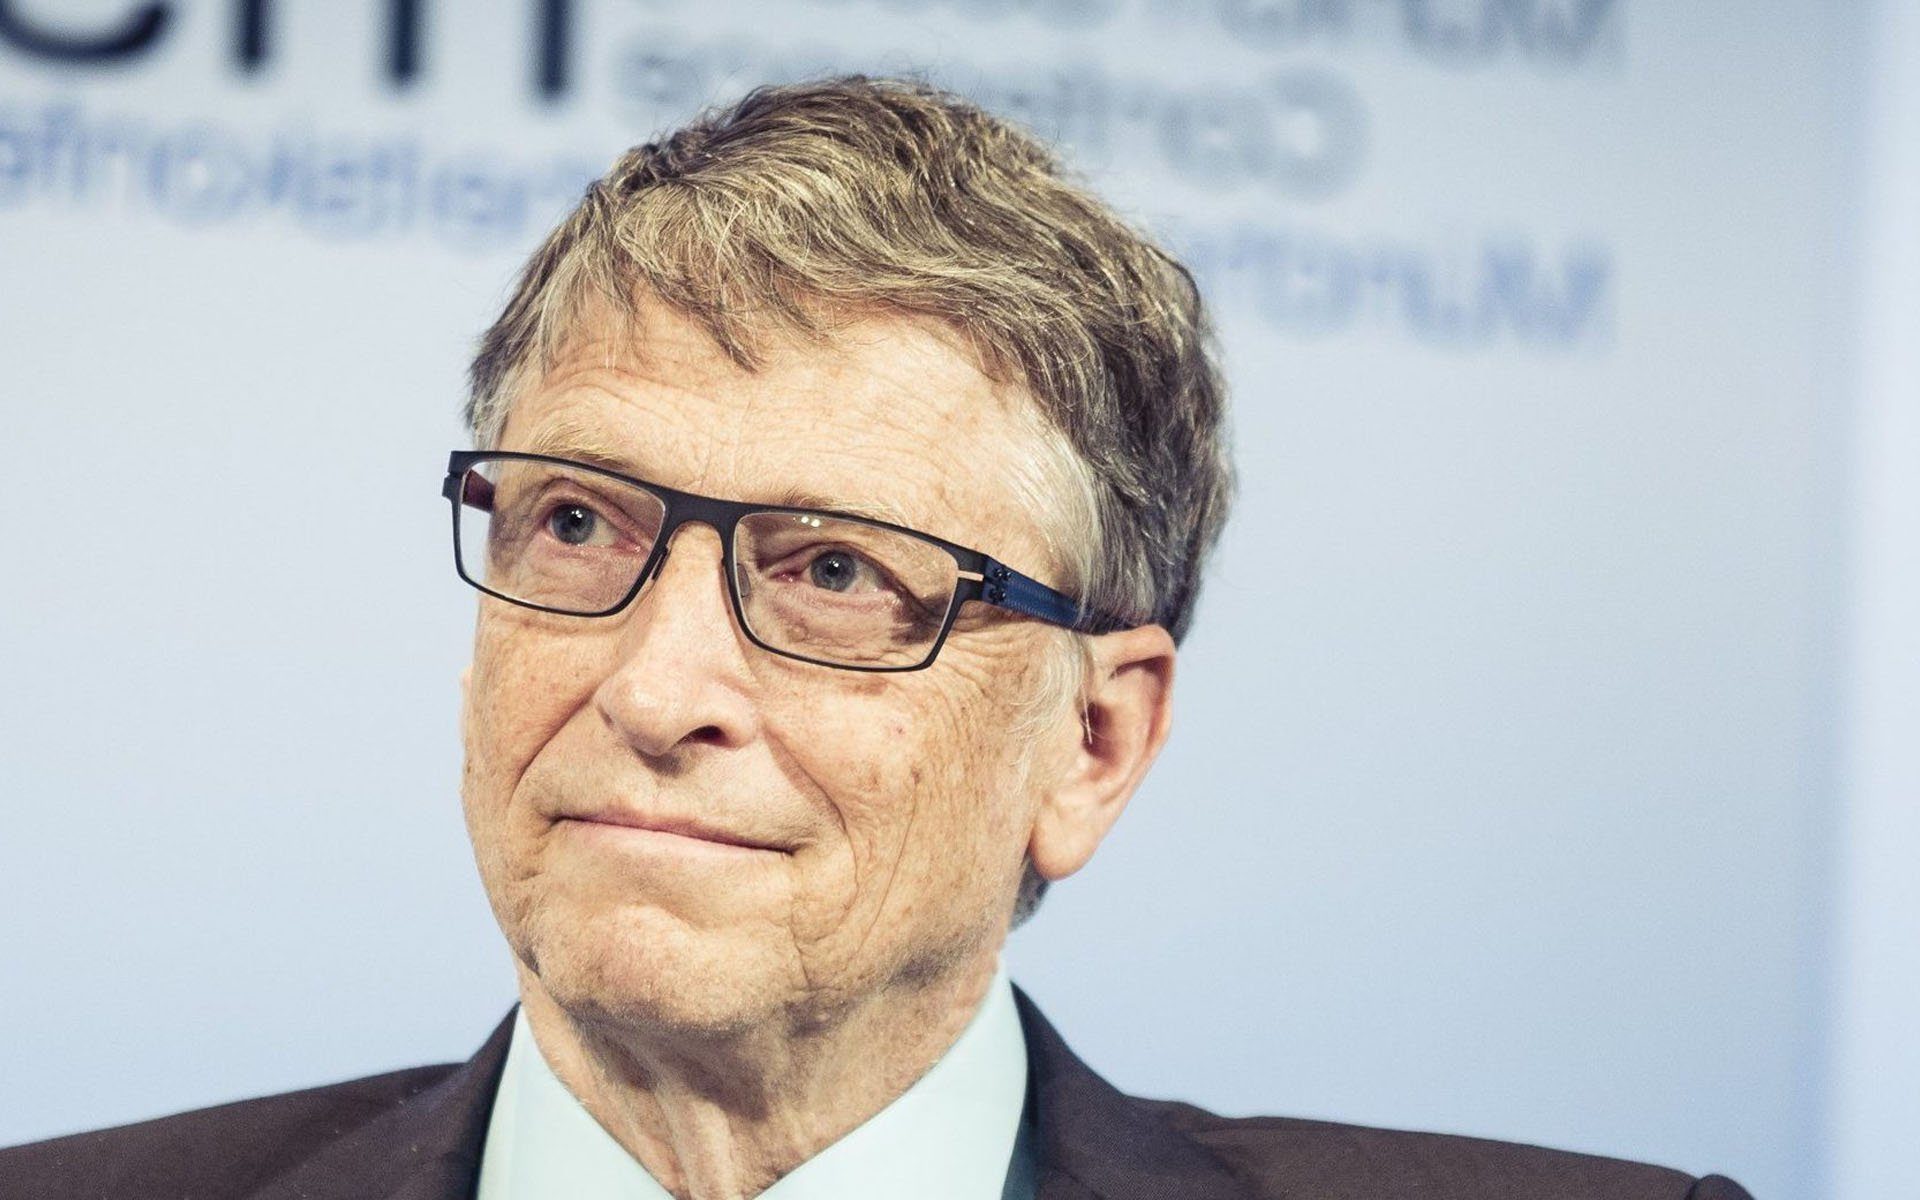 Bitcoin Solves This: Bill Gates Talks About the US Wealth Gap